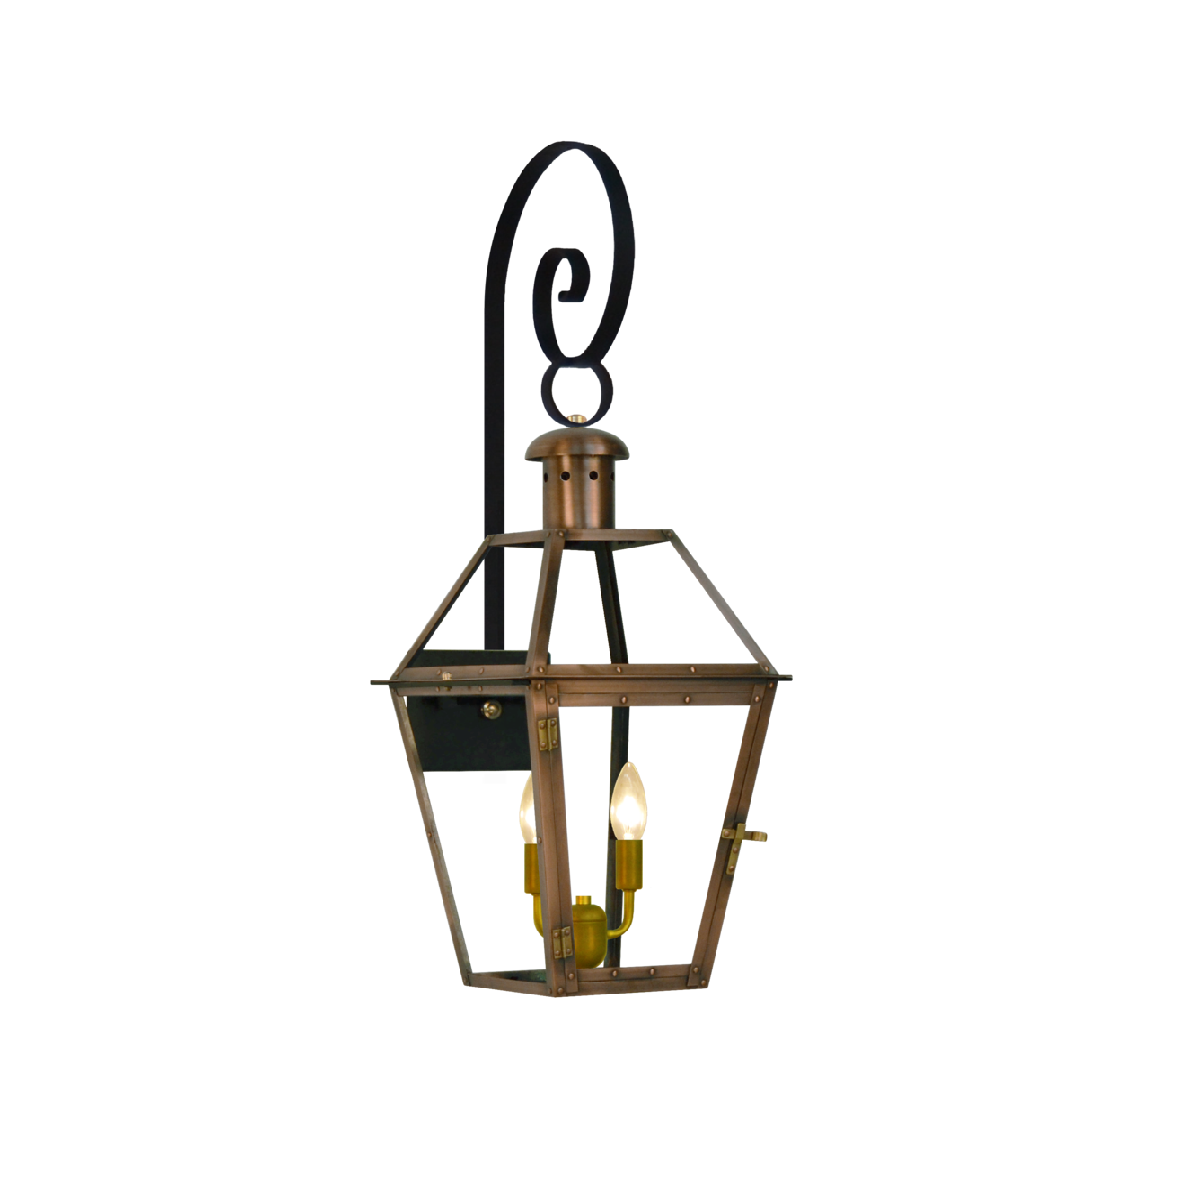 Georgetown Gas or Electric Copper Lantern on Wall Mount with Top and Bottom  Scrolls